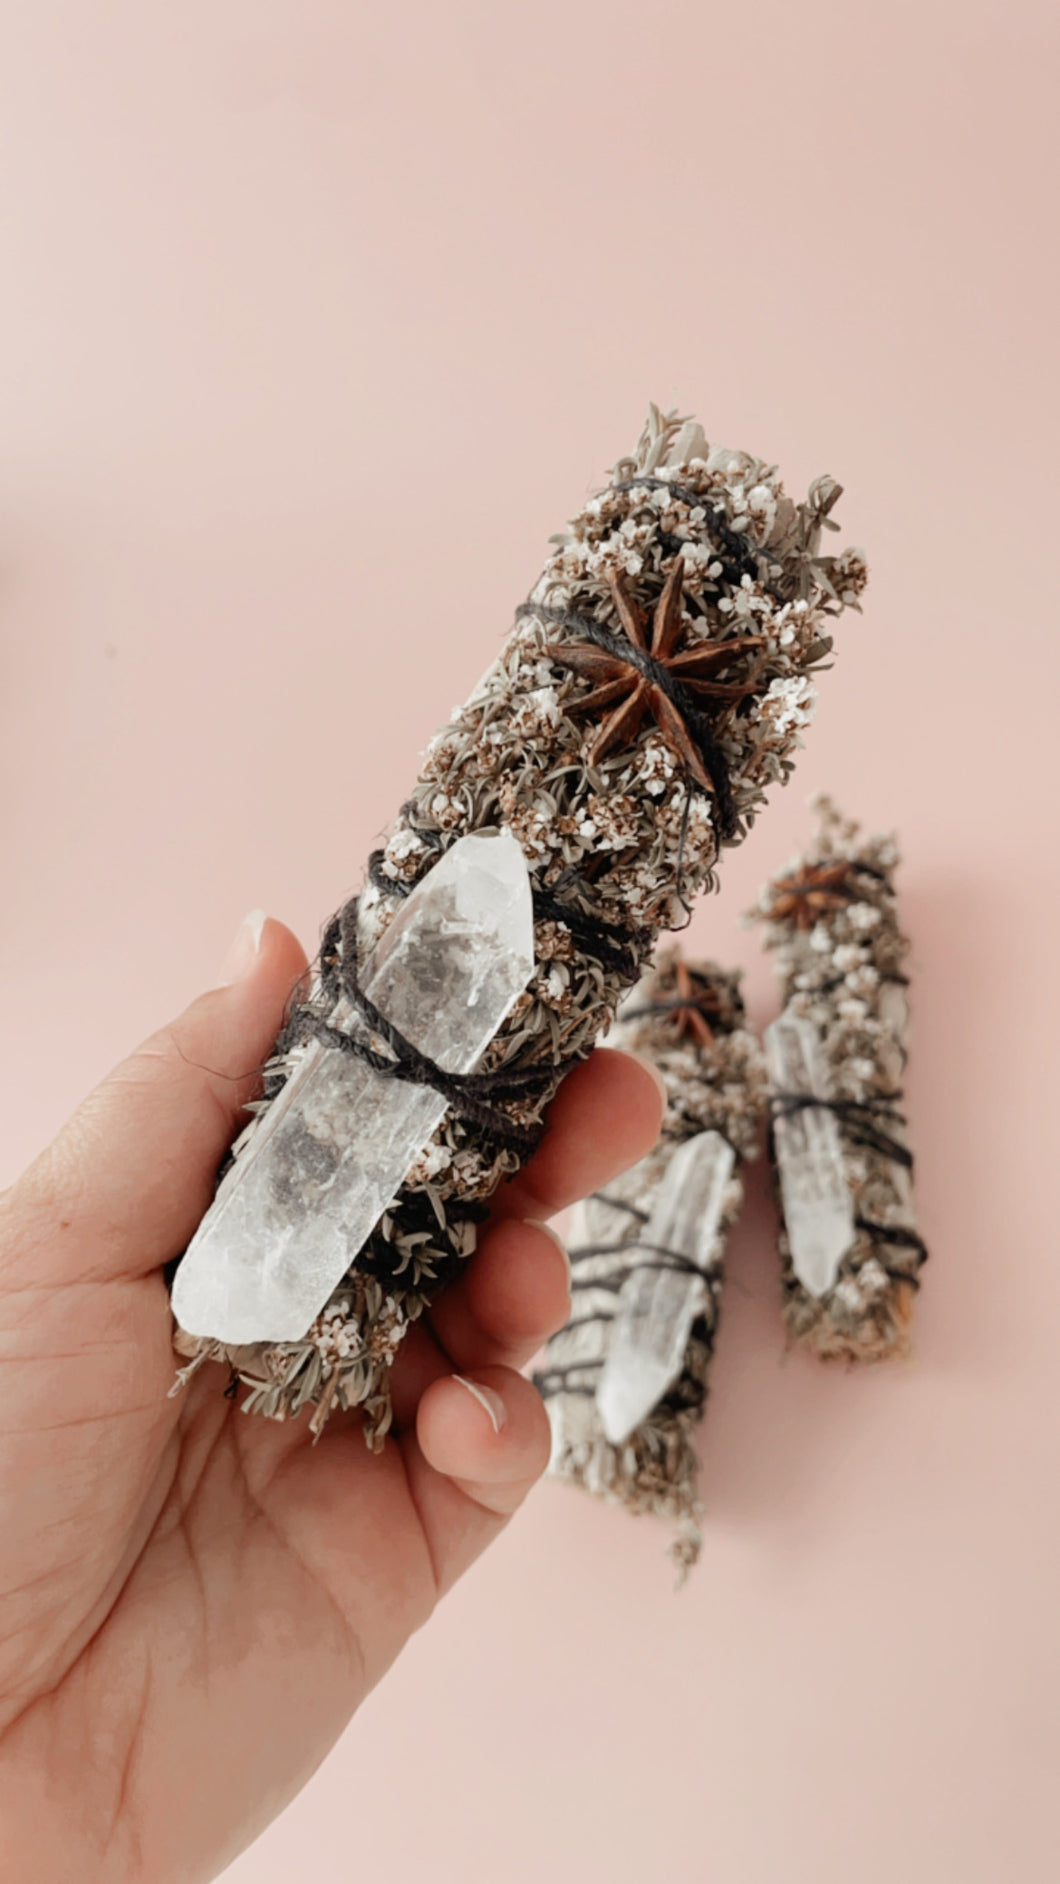 Herbal Cleansing Smudging Wands